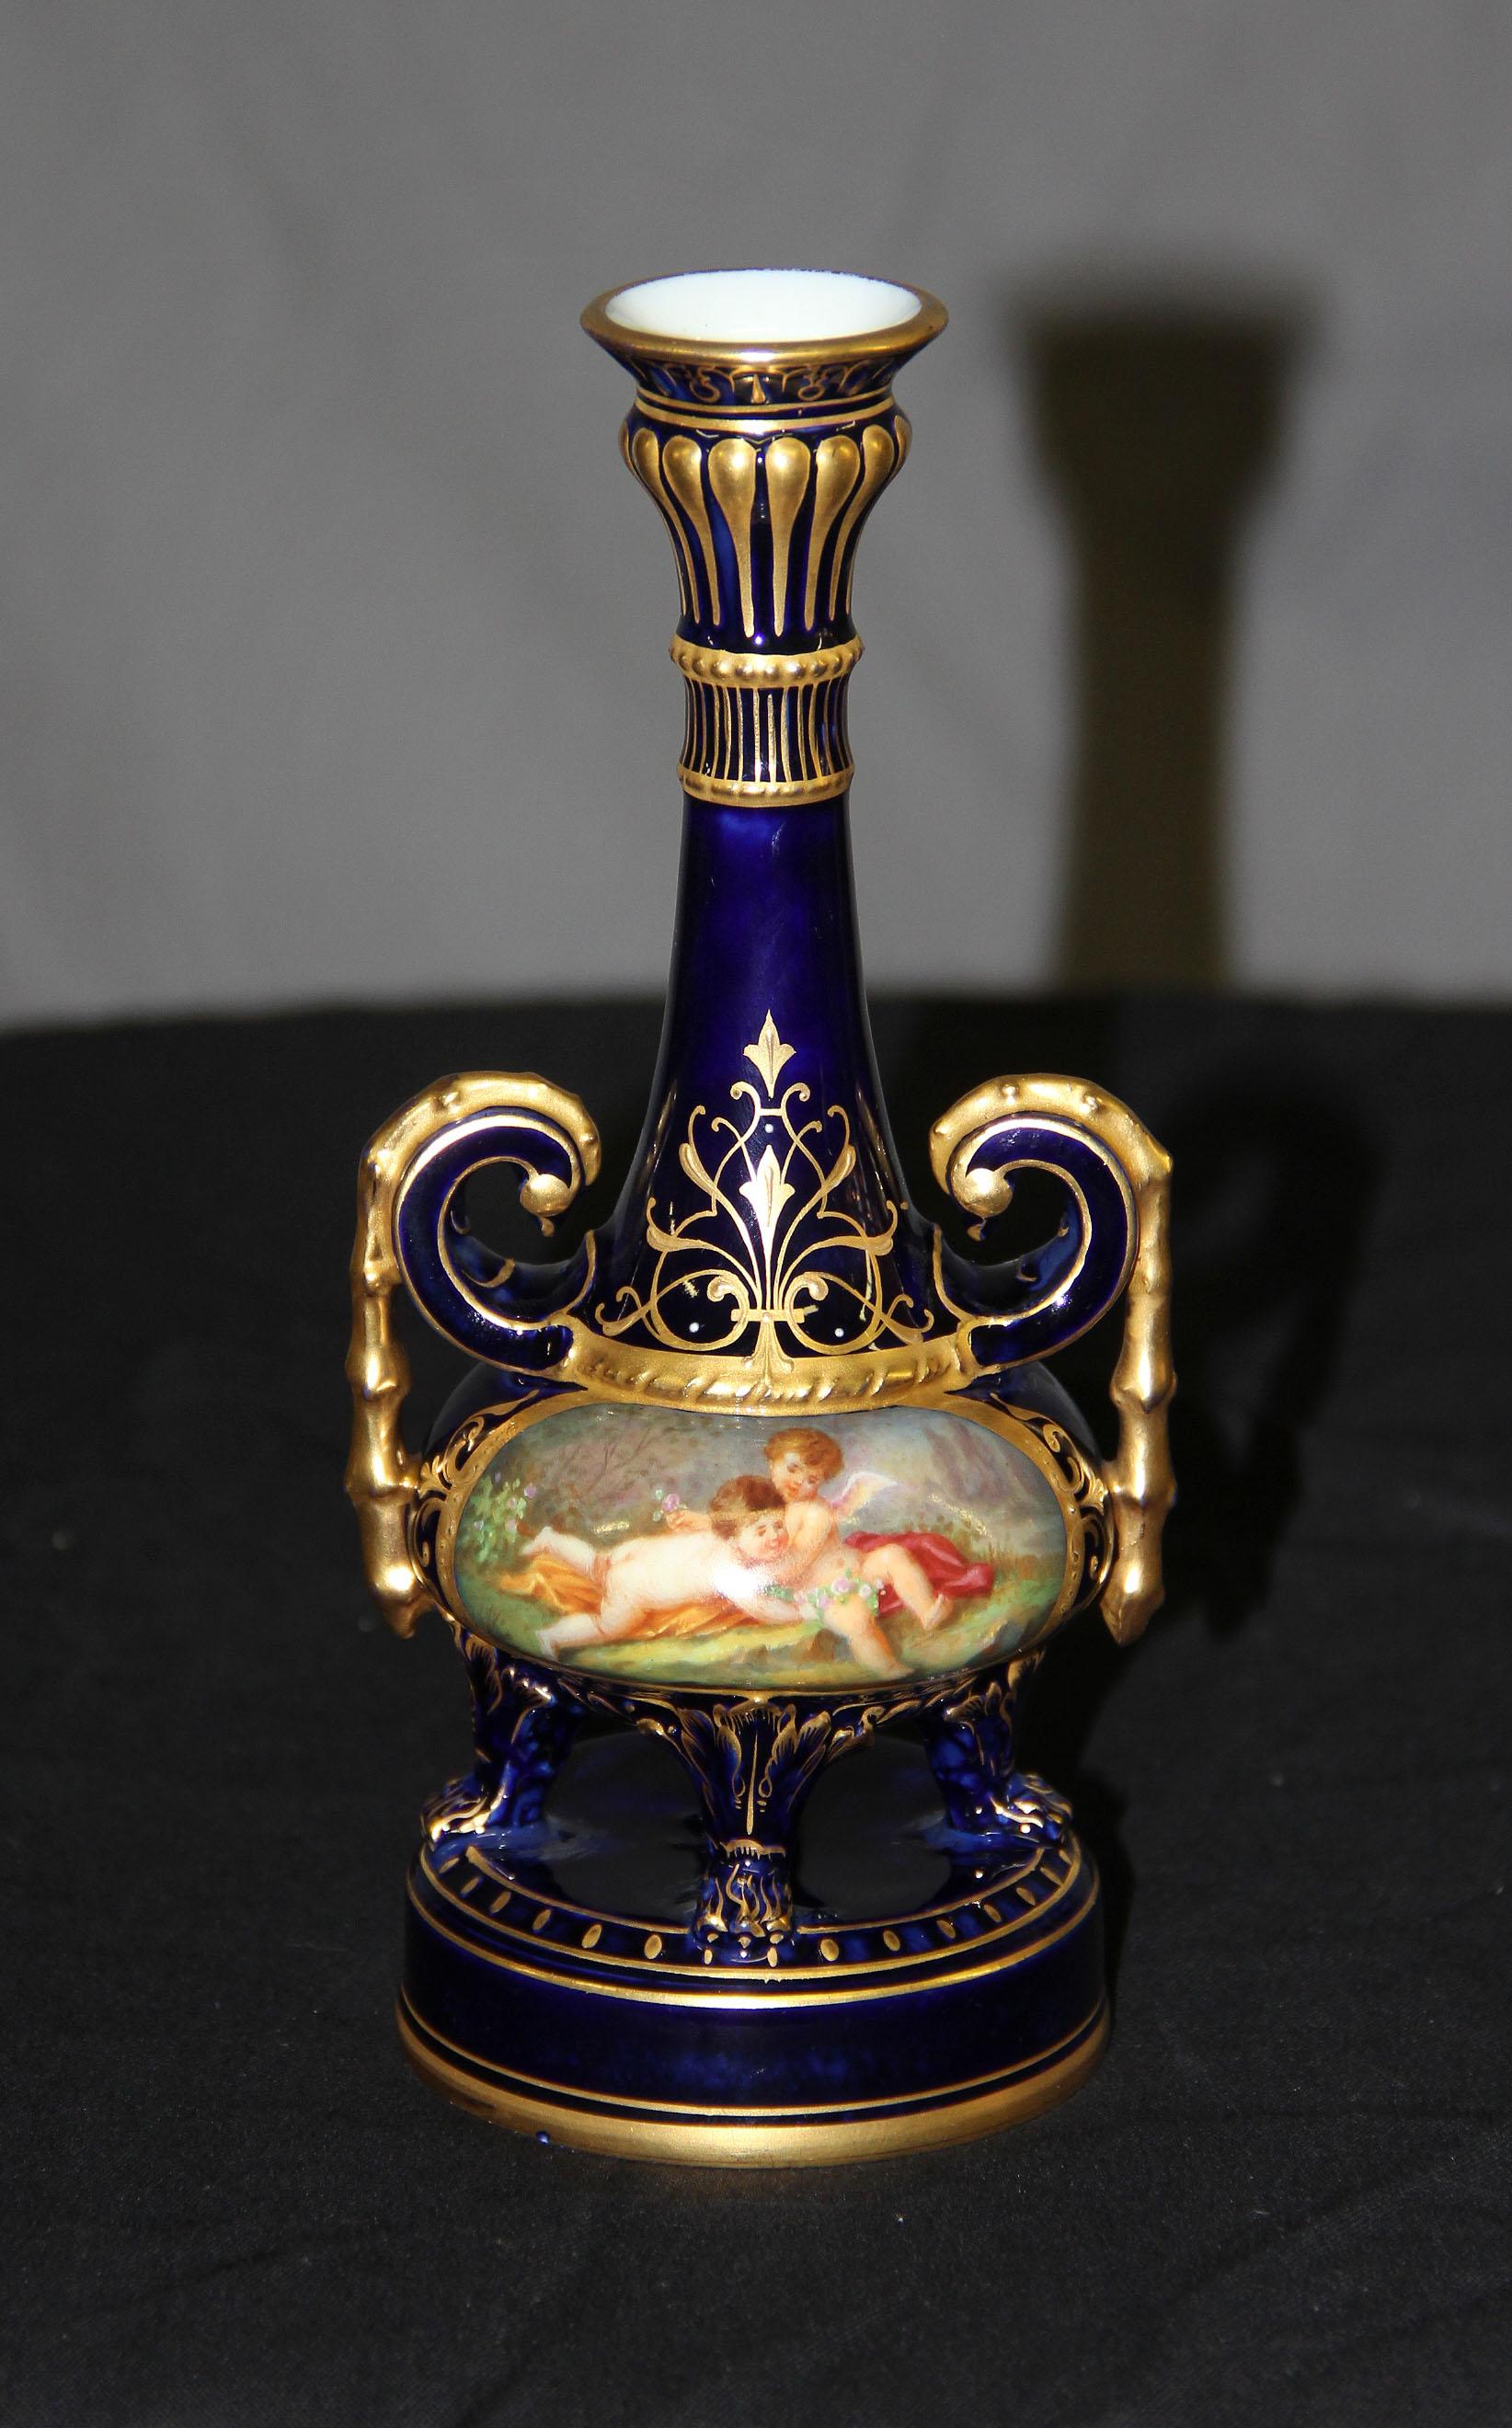 A wonderful little Vienna style porcelain vase.

With an oval picture depicting two cherubs at play with raised gold designs, fluted neck and lion paw feet standing on a round base.